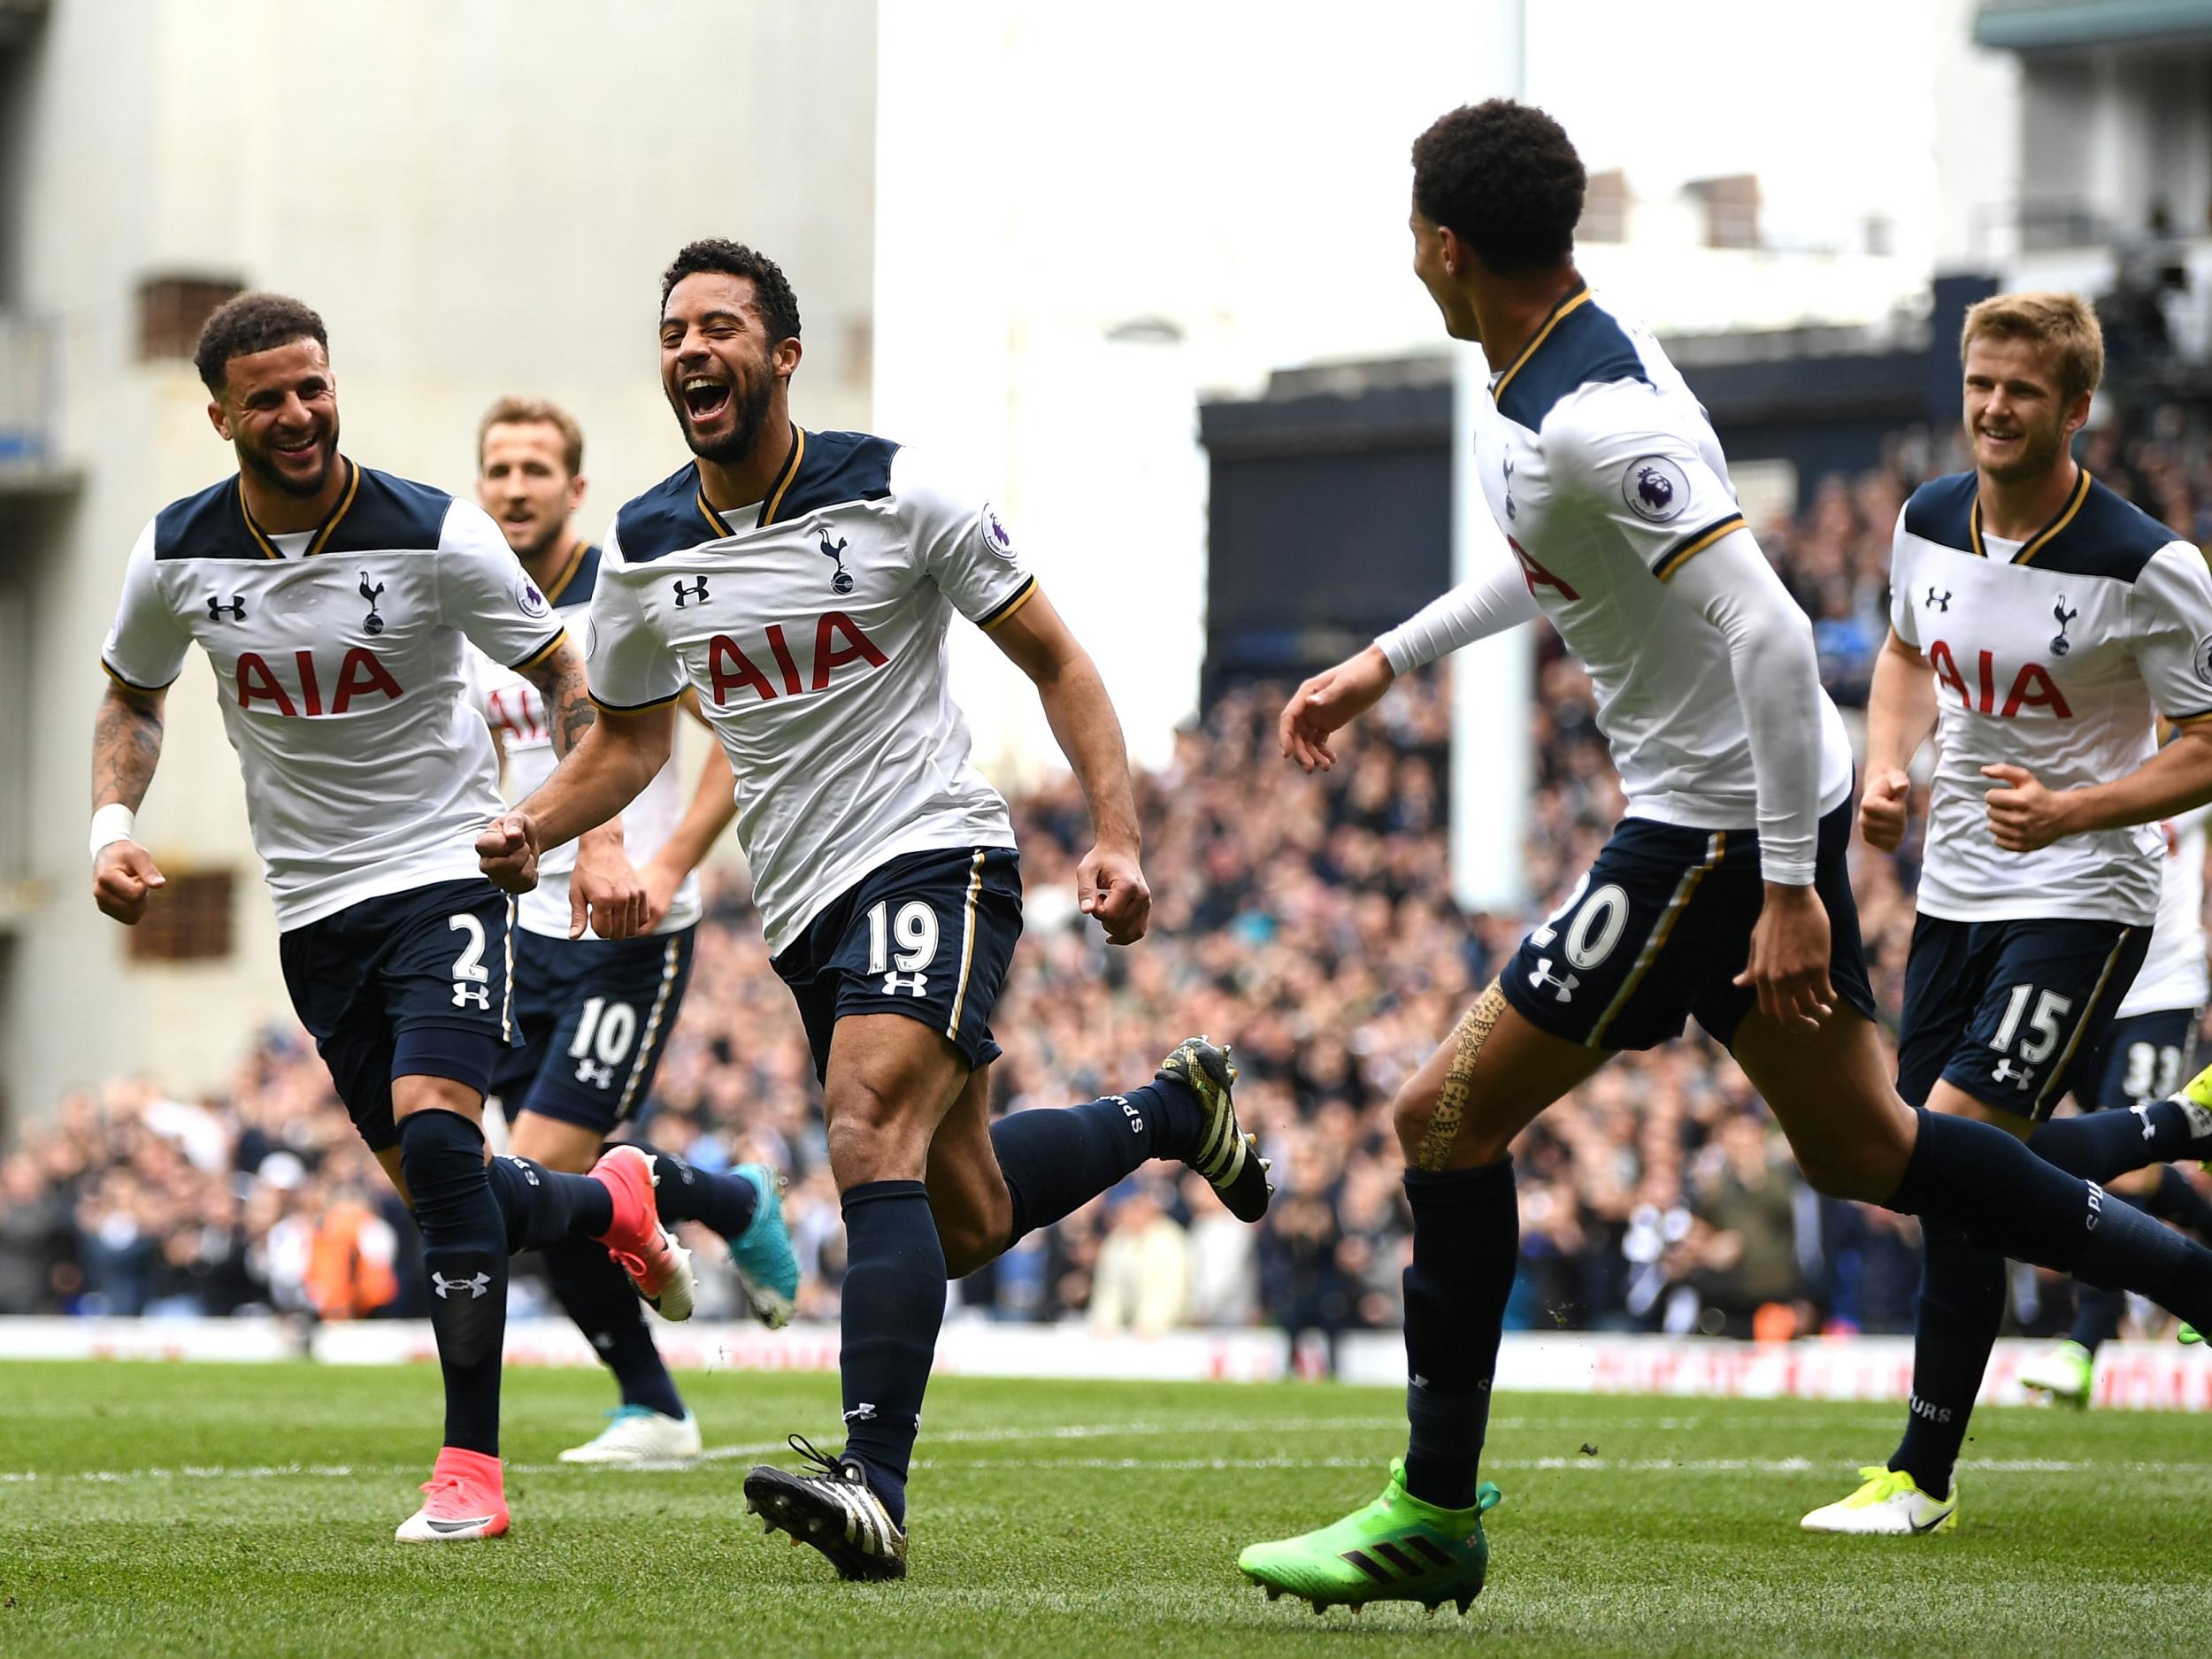 Tottenham are on fire and are still in the hunt for silverware on two fronts